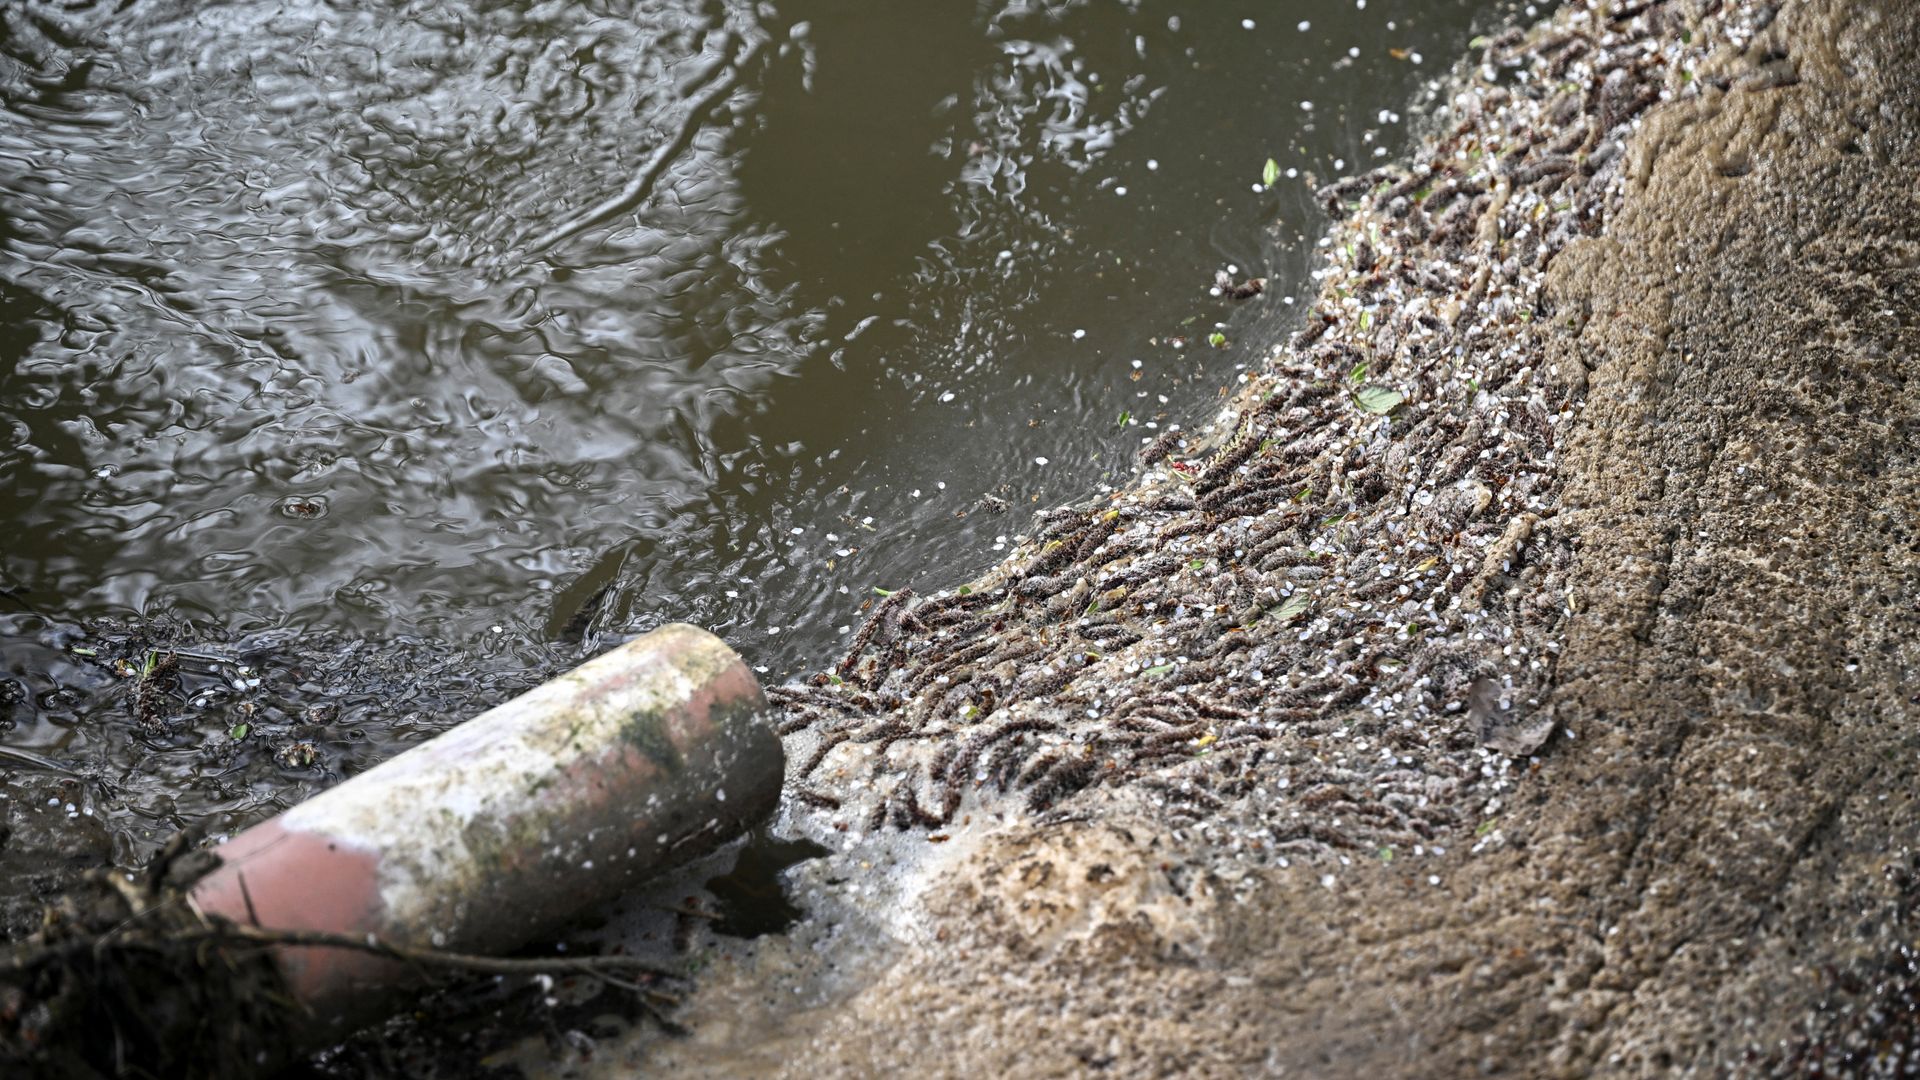 All wastewater companies in England and Wales face investigation over sewage spills